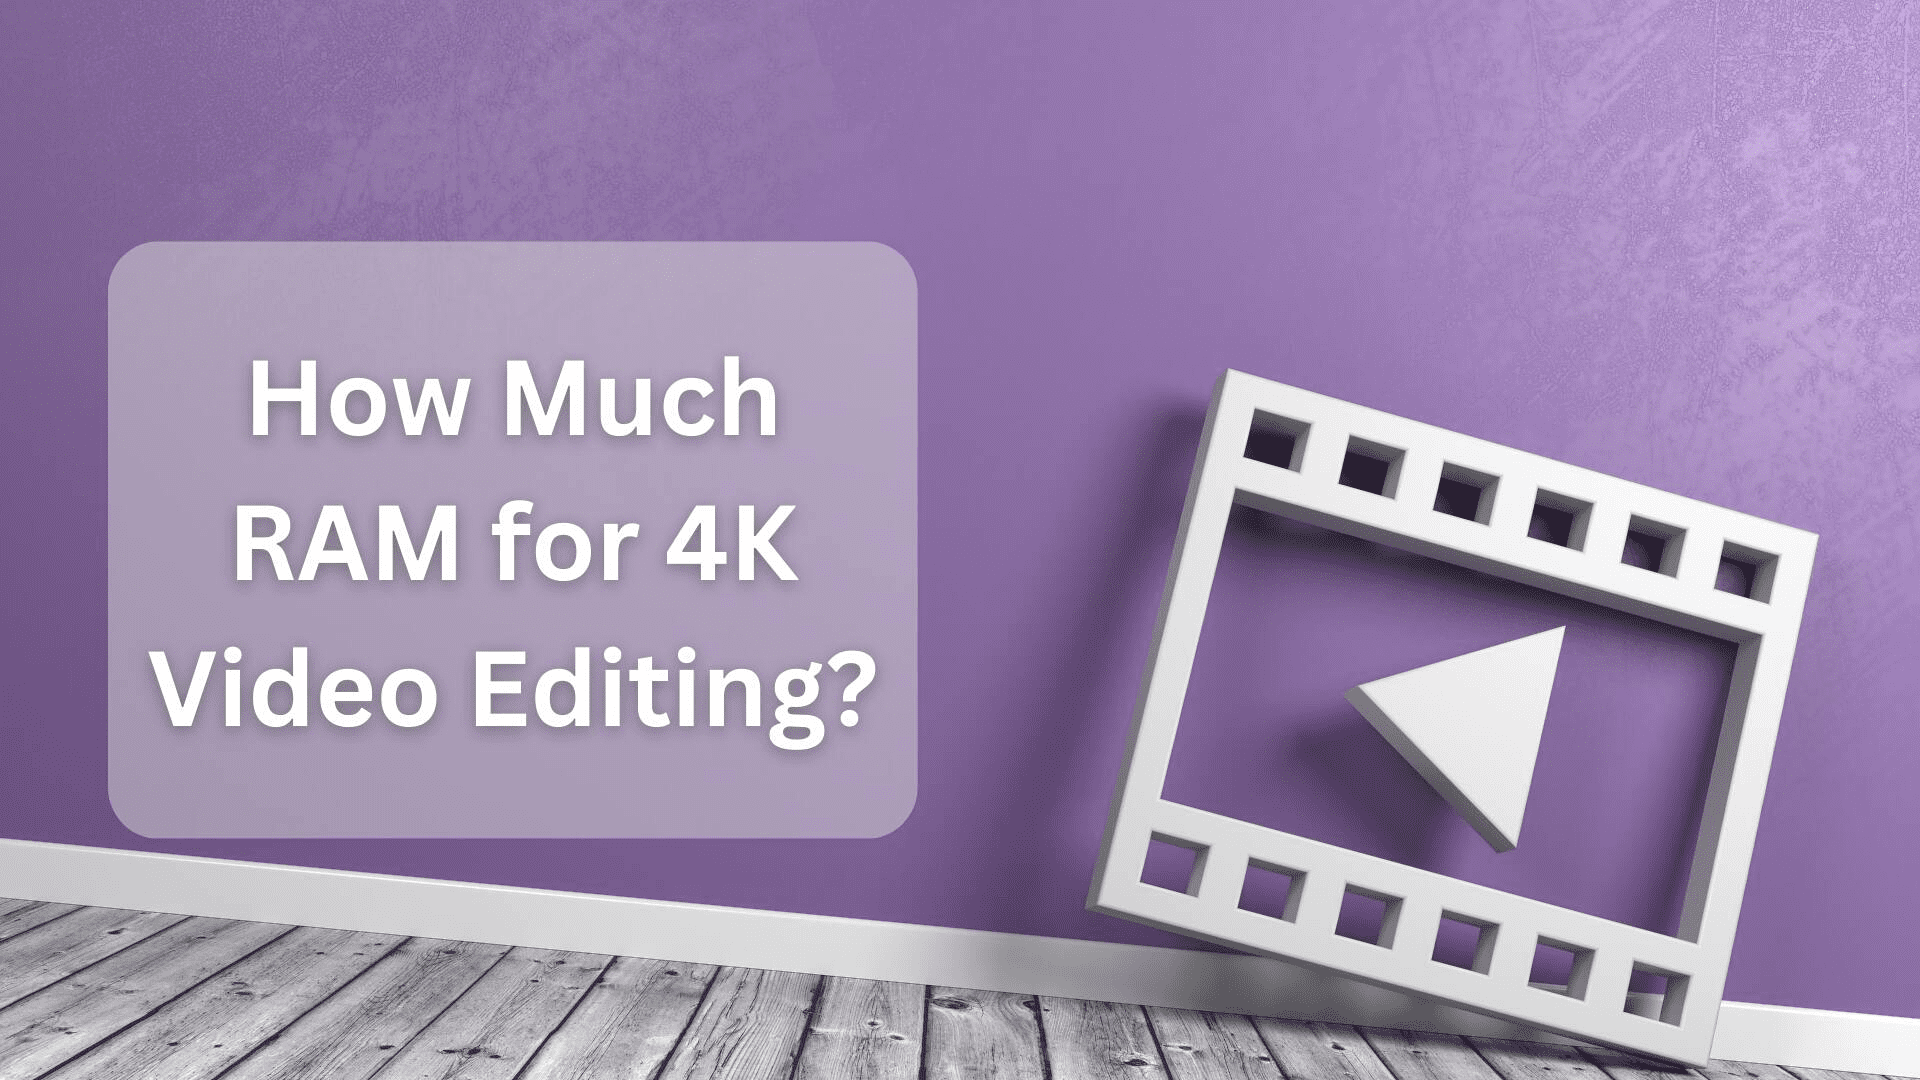 How Much RAM for 4K Video Editing?